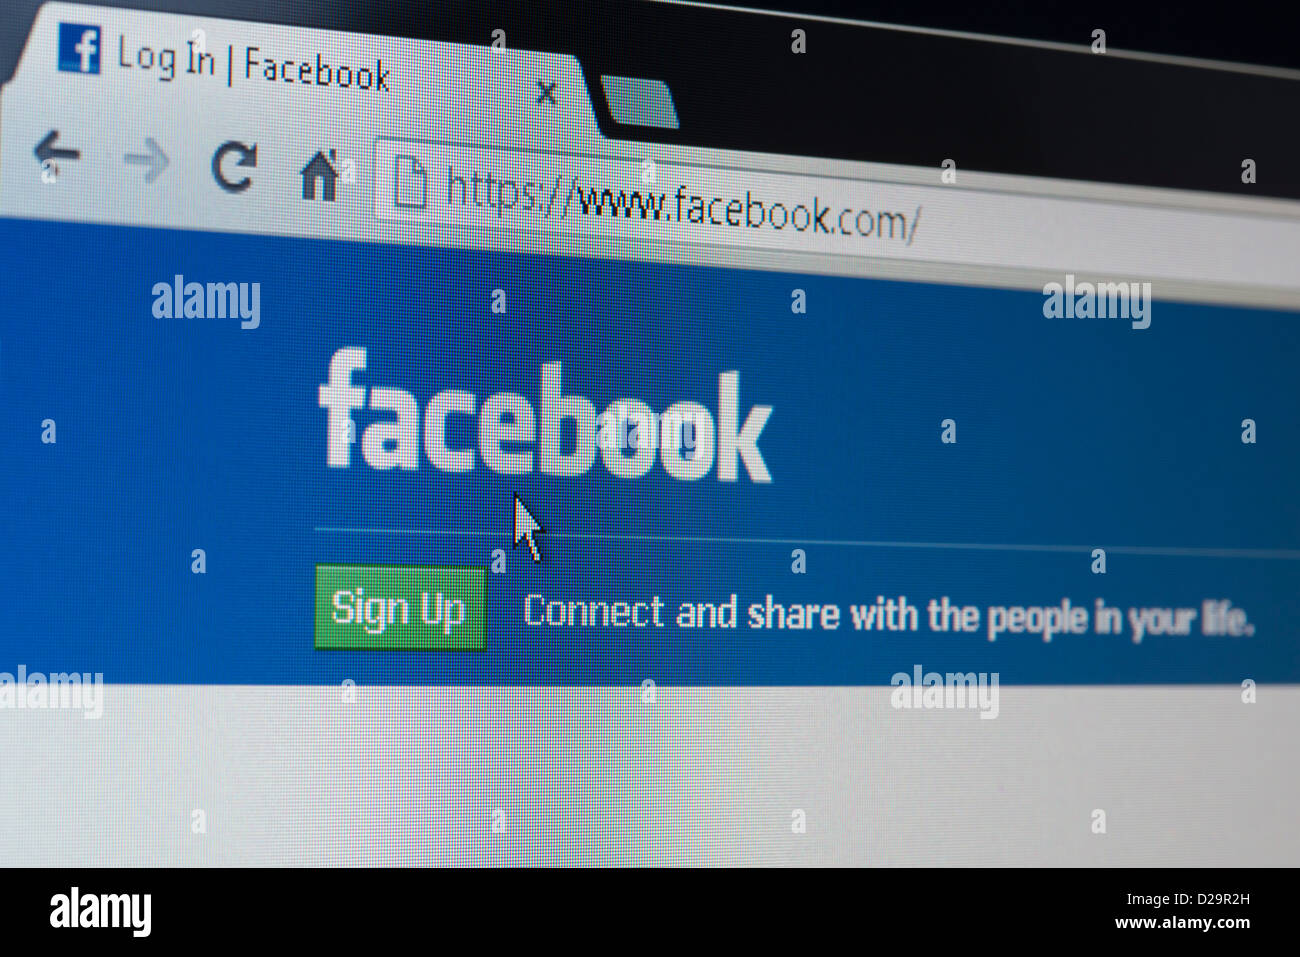 Secure Facebook Log In And Sign Up Home Page Stock Photo